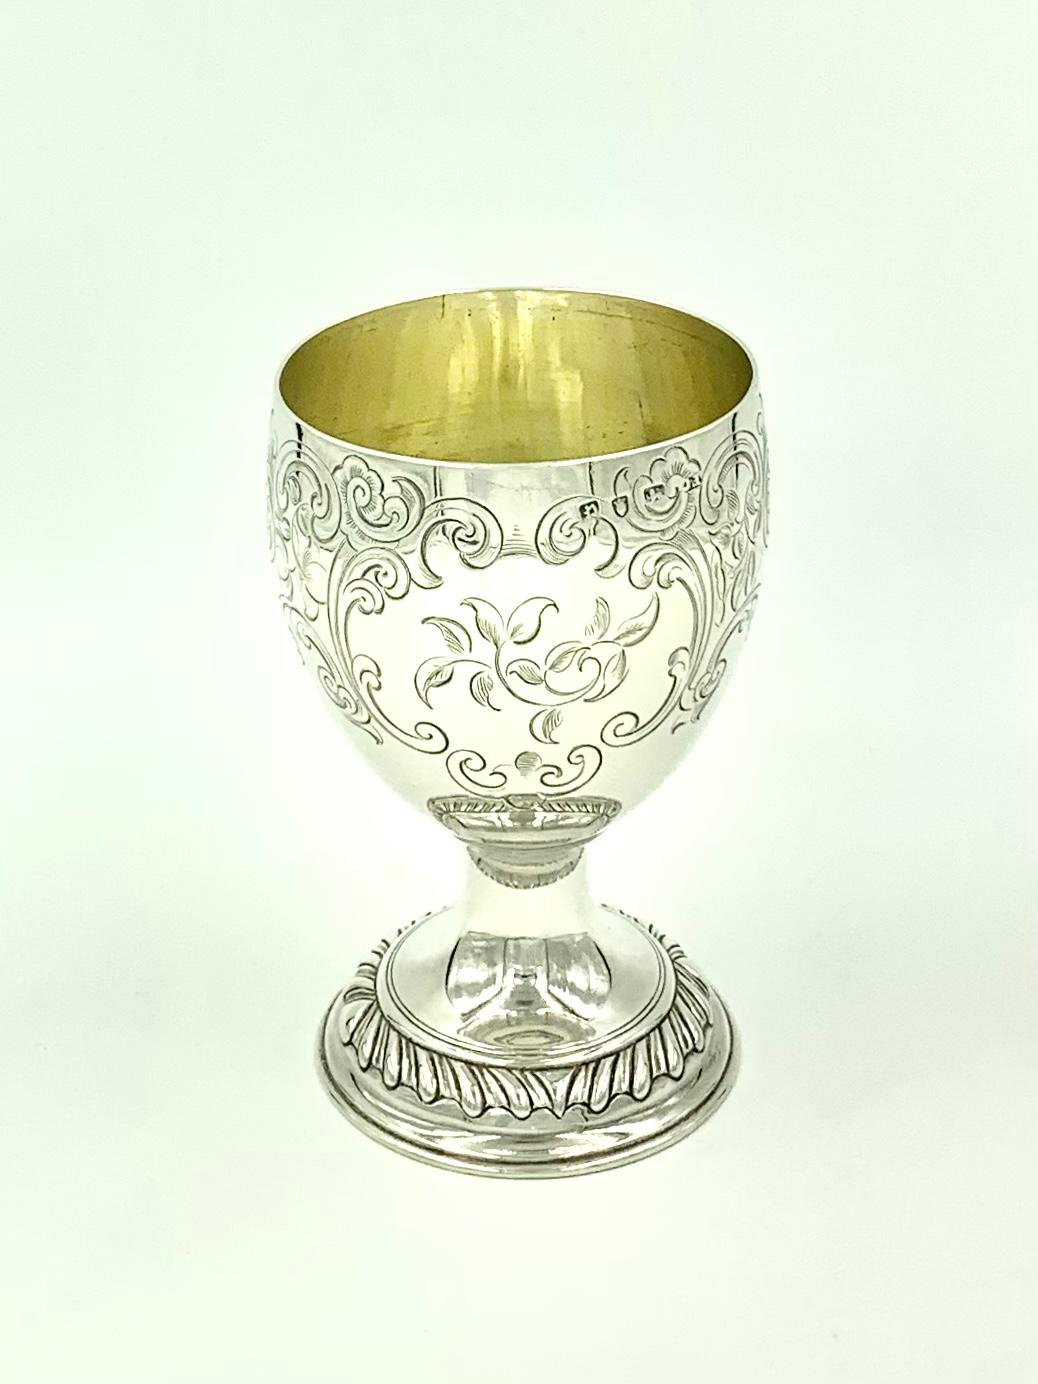 Fine 18th Century George III period engraved repousse sterling silver goblet by Francis Crump, London, 1770.
The use of sterling silver drinking vessels is associated with good health as silver is prized for removing impurities from libations.